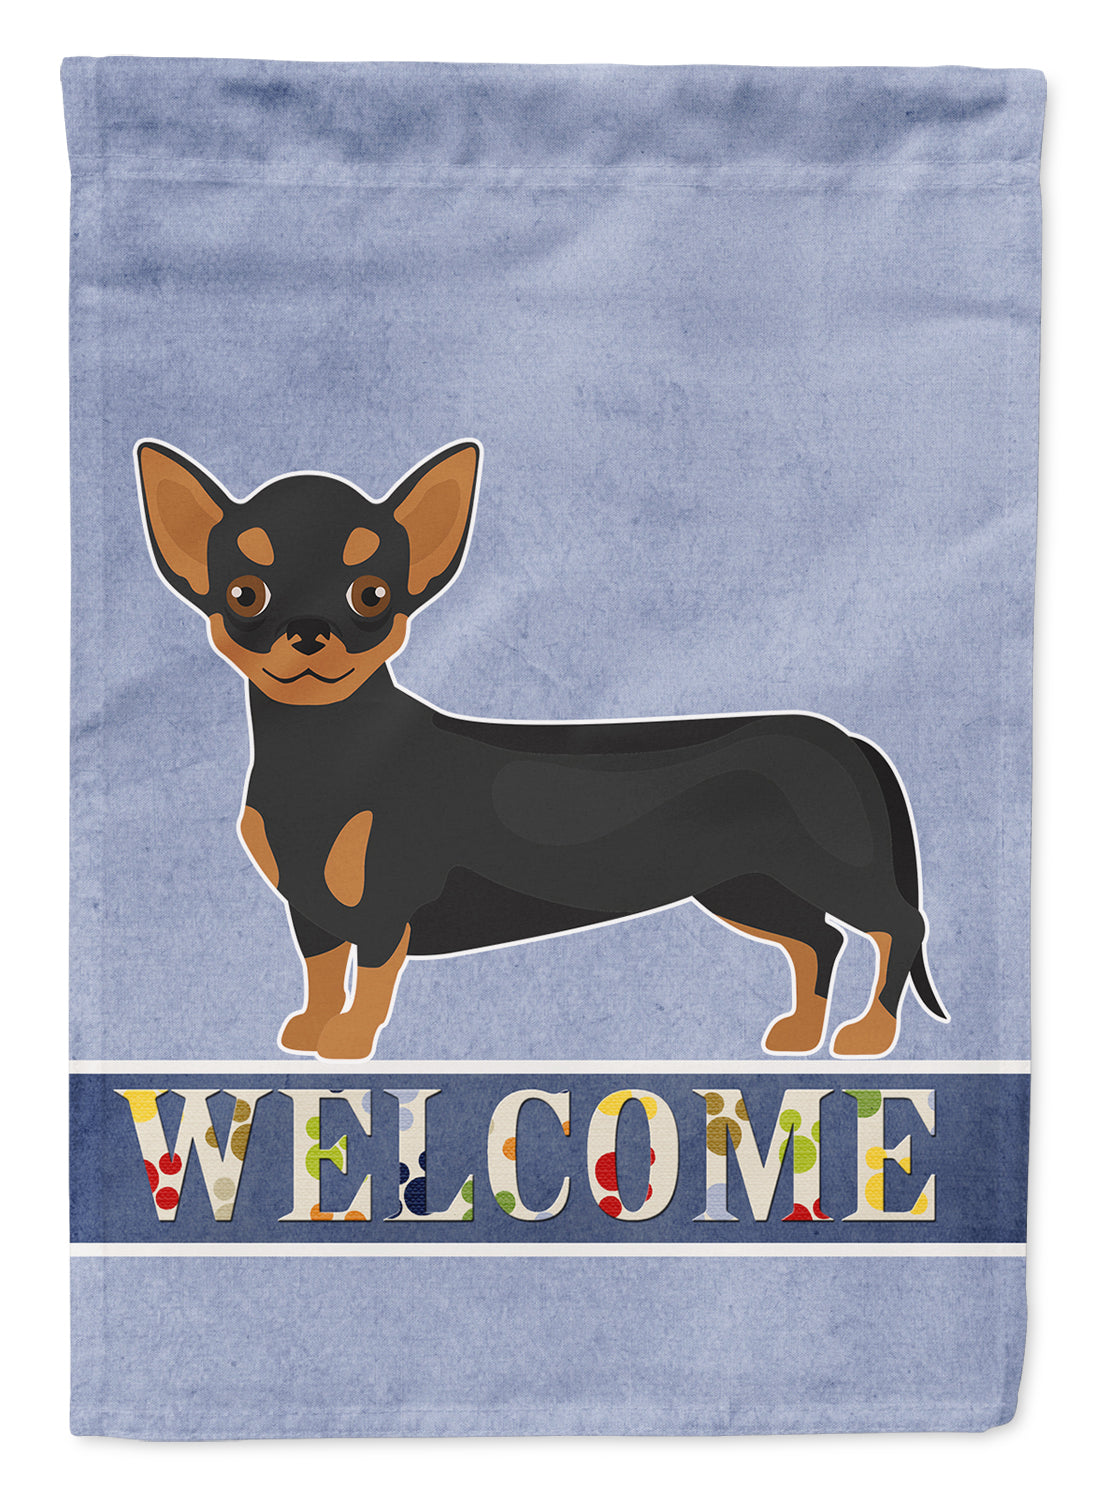 Black and Tan Chiweenie Welcome Flag Garden Size CK3722GF